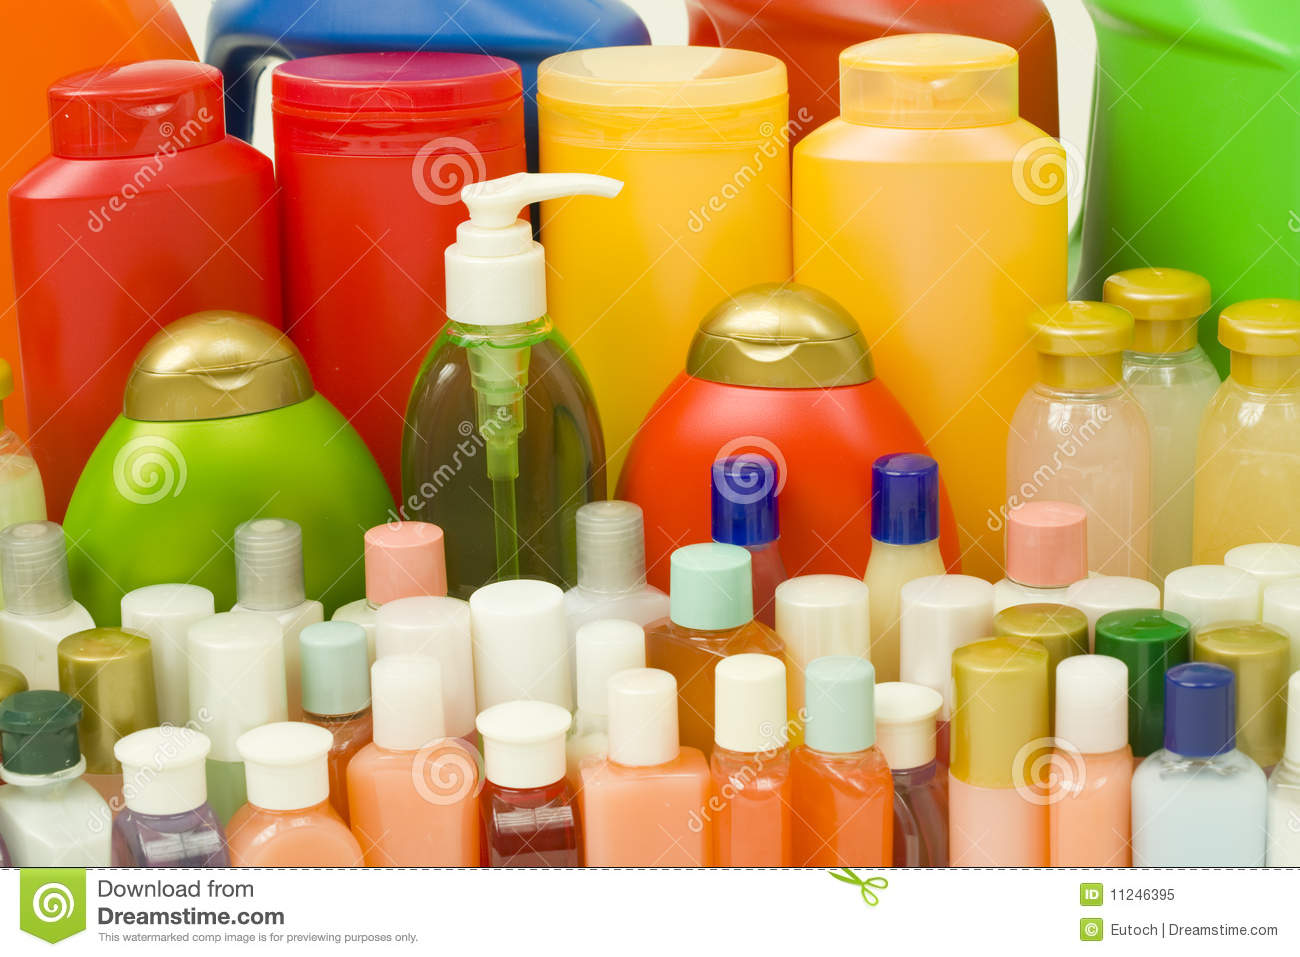 Hygiene Products In Colorful Bottles Royalty Free Stock Photo   Image